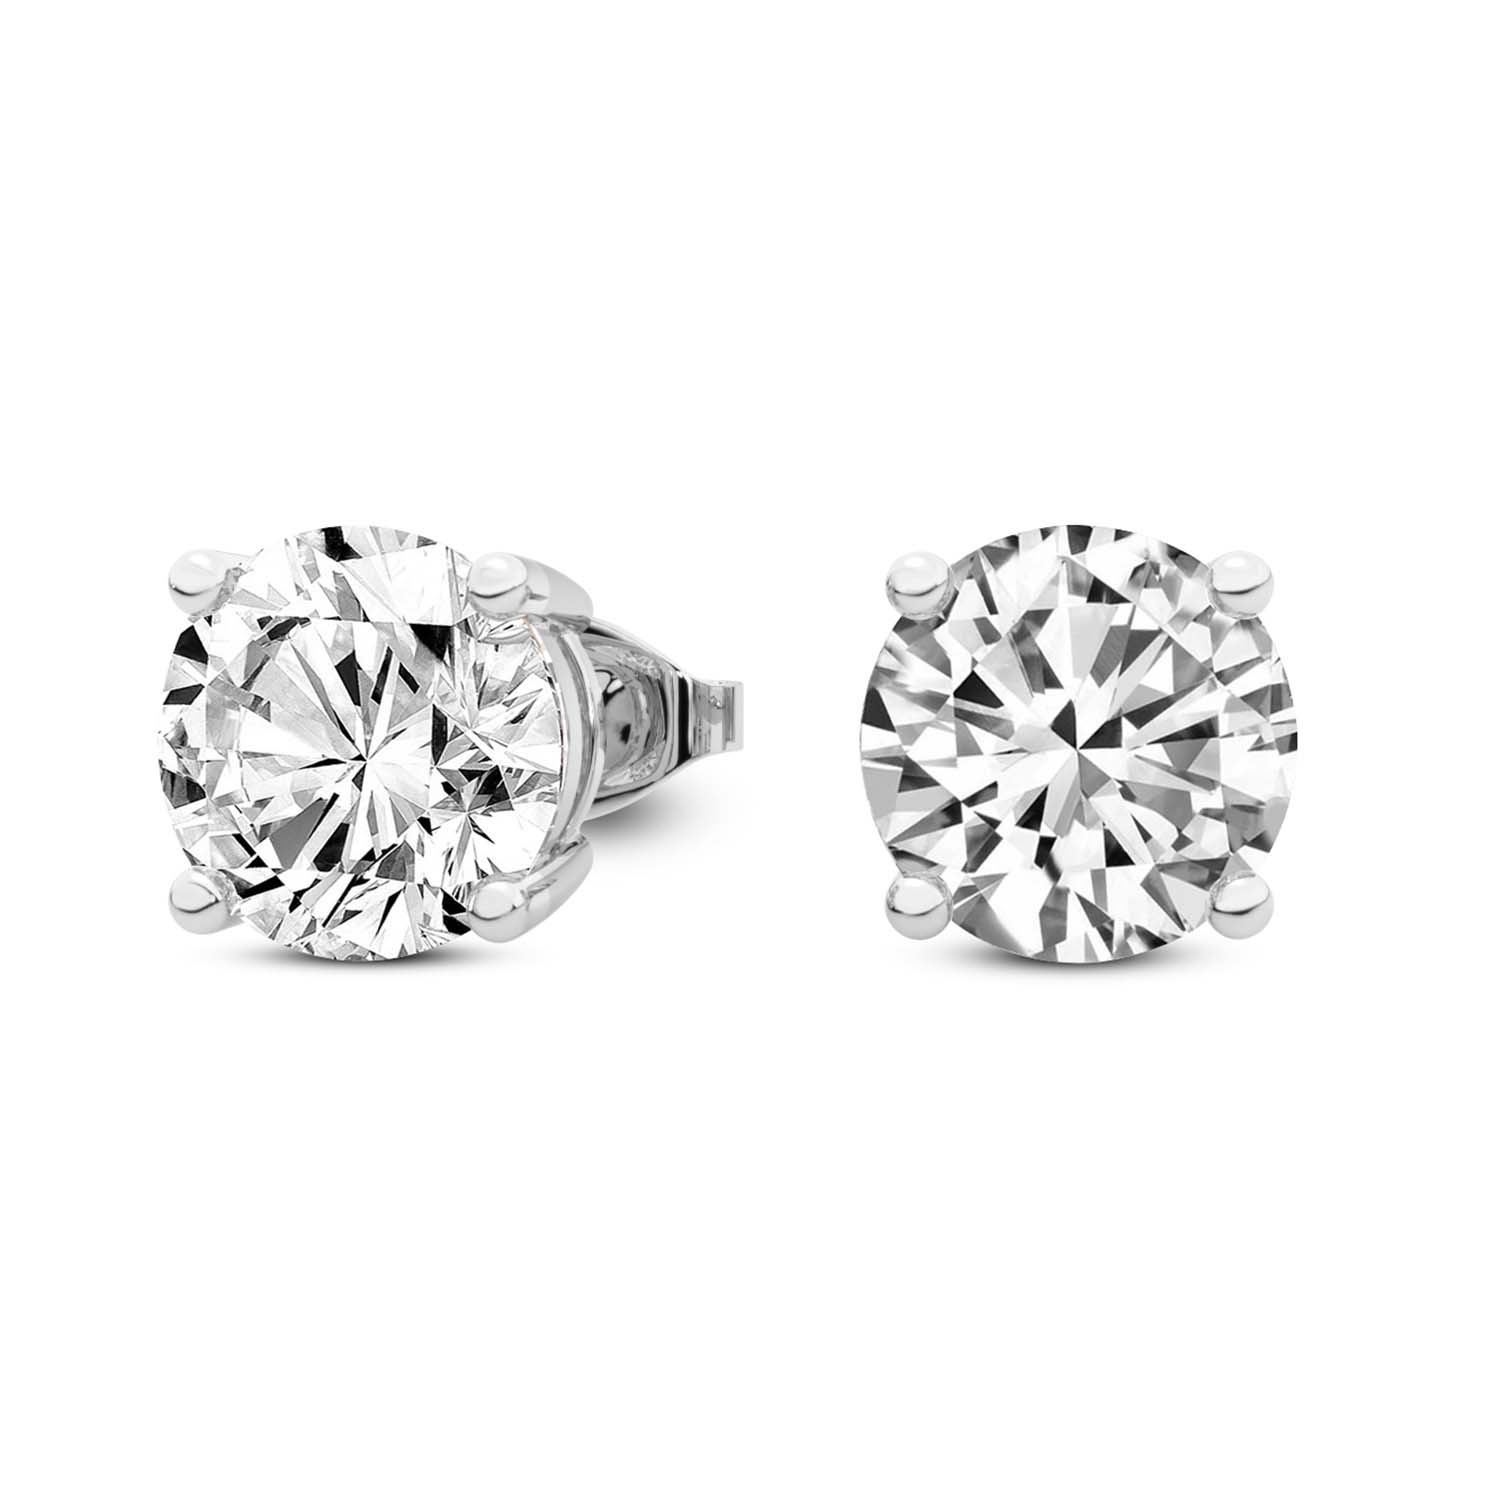 4 Prong Round Lab Diamond Stud Earrings white gold earring, small right view